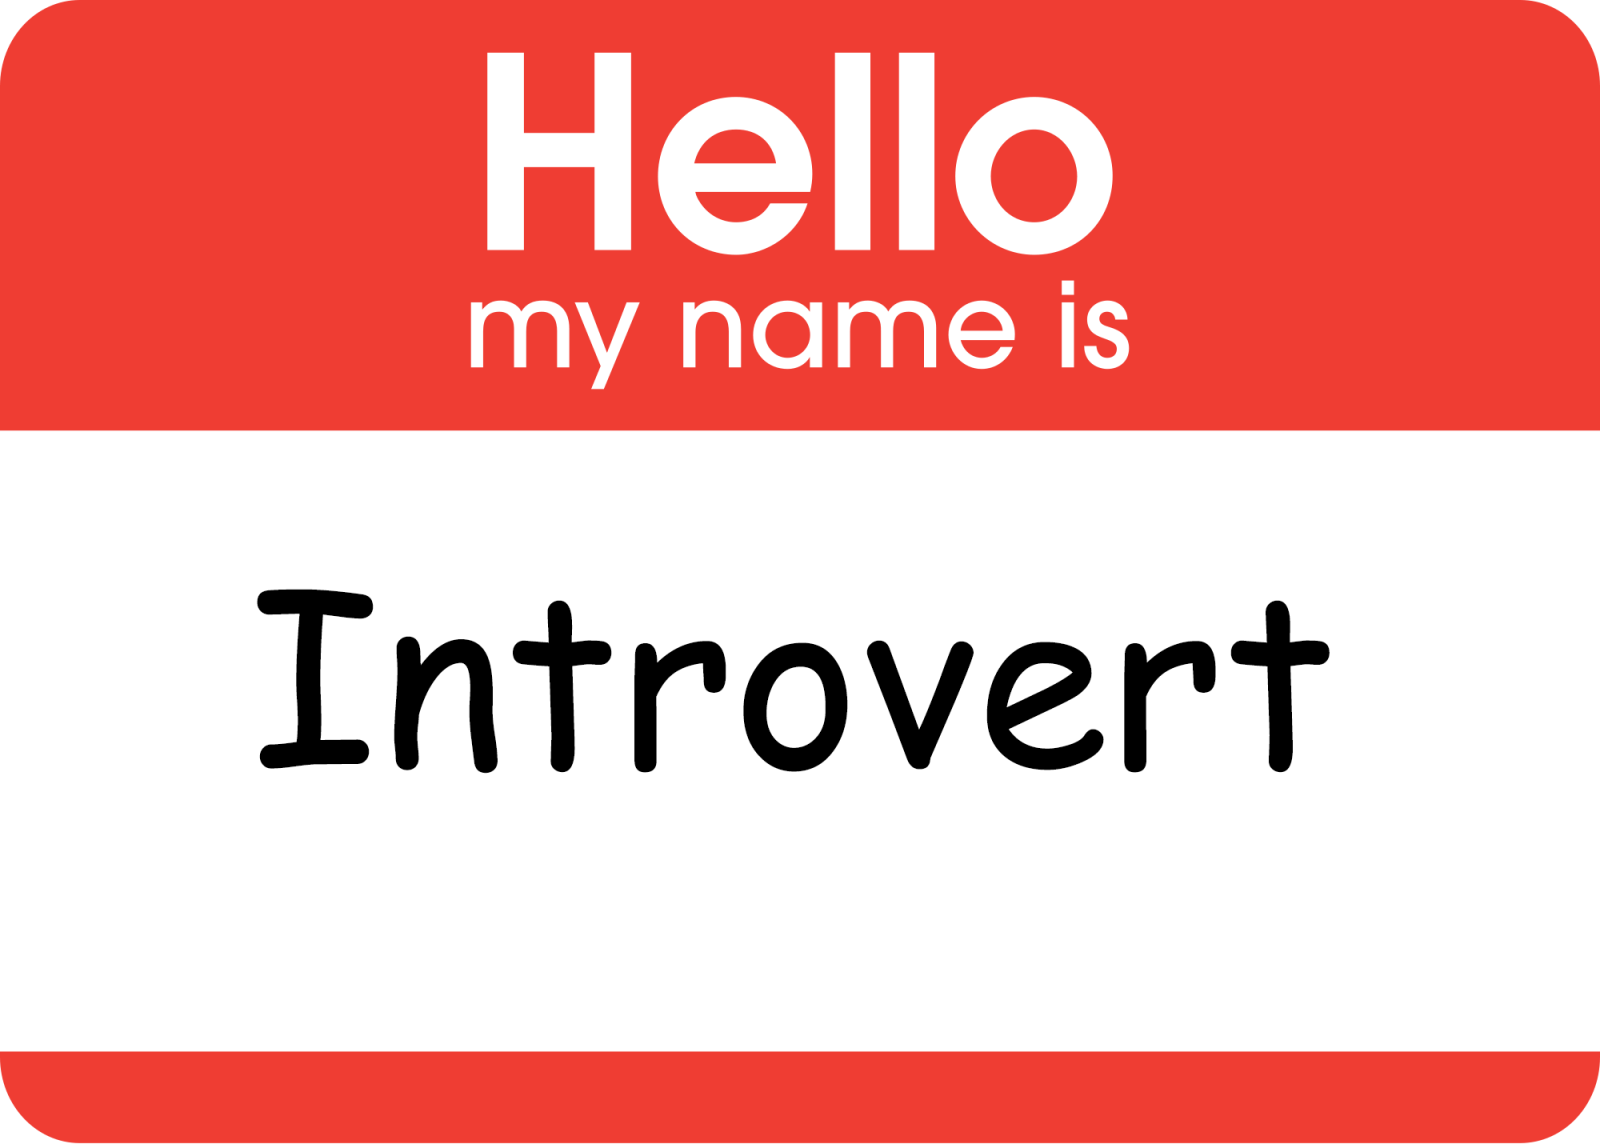 How HR introverts can grab the CEO’s attention